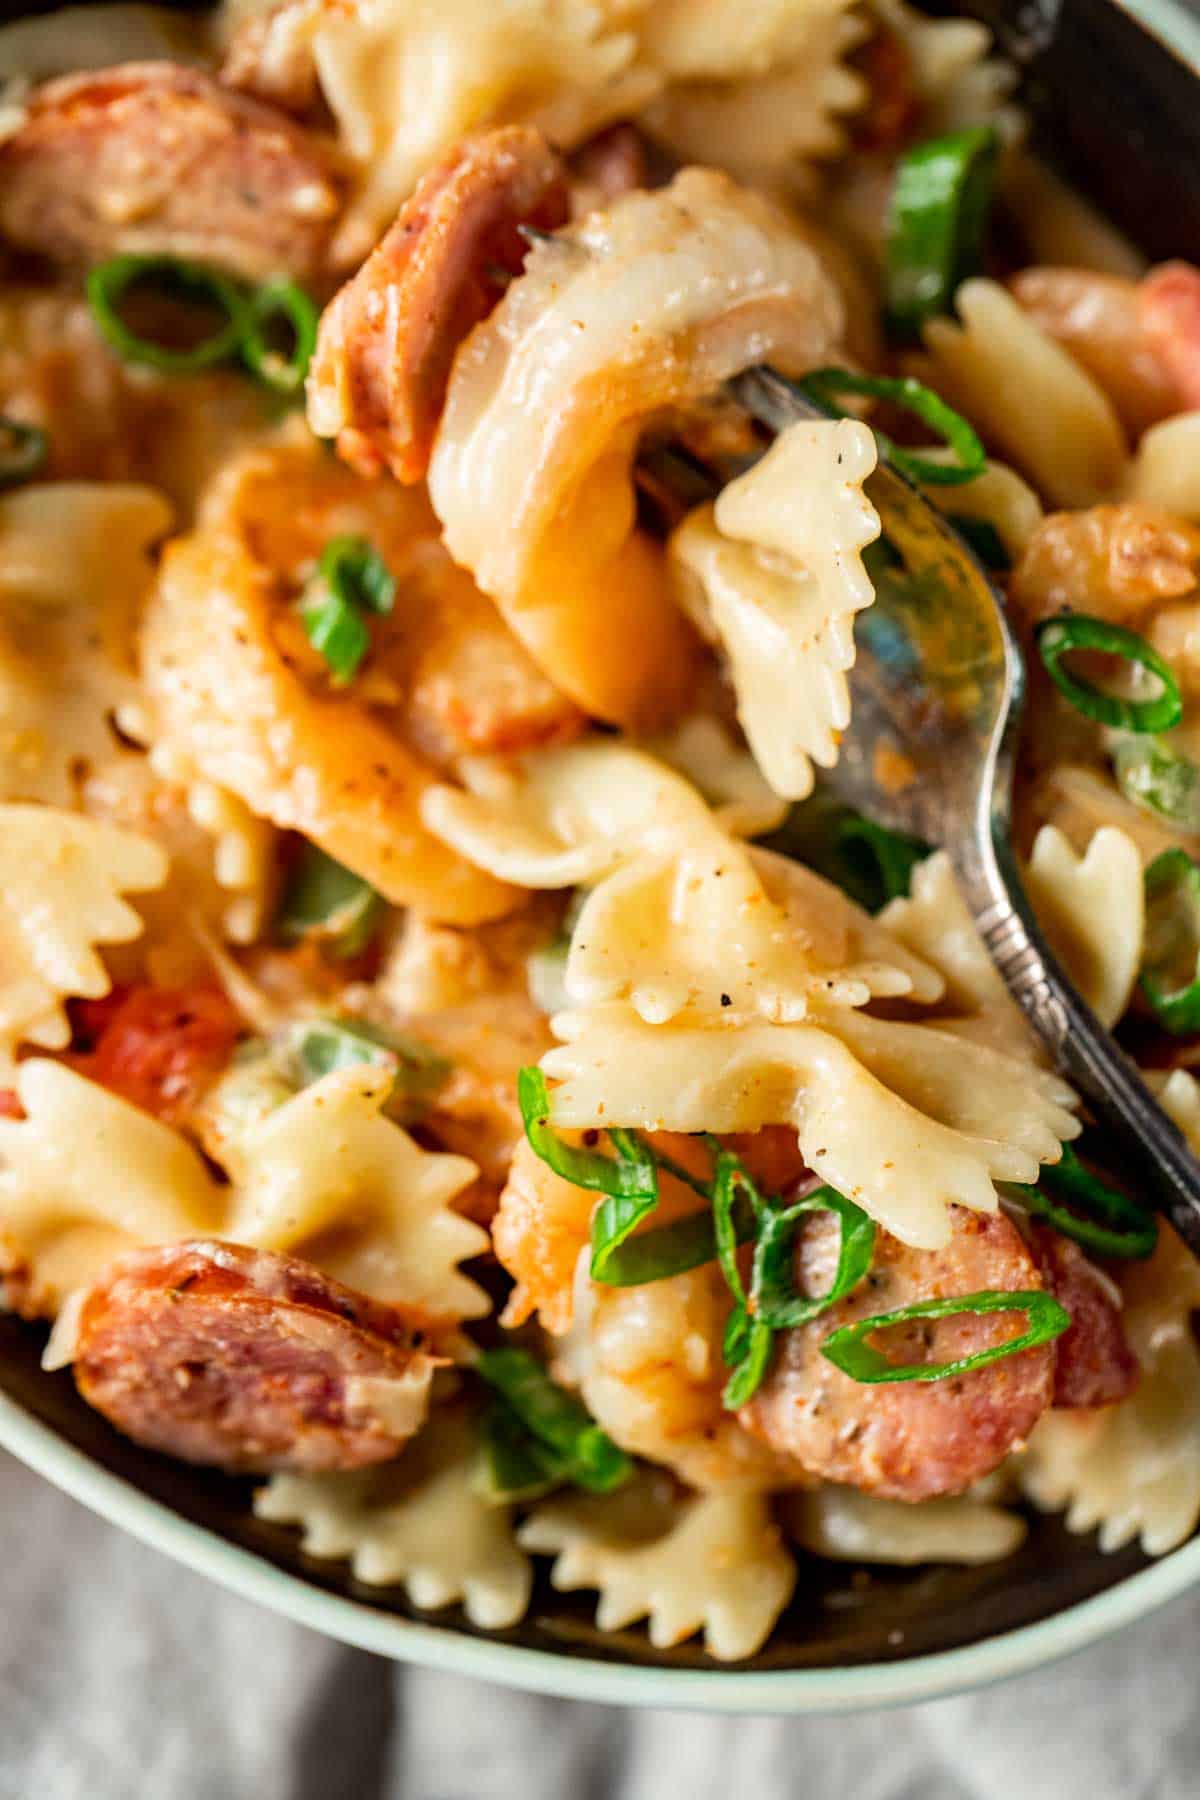 pasta with shrimp and sausage in a cream sauce